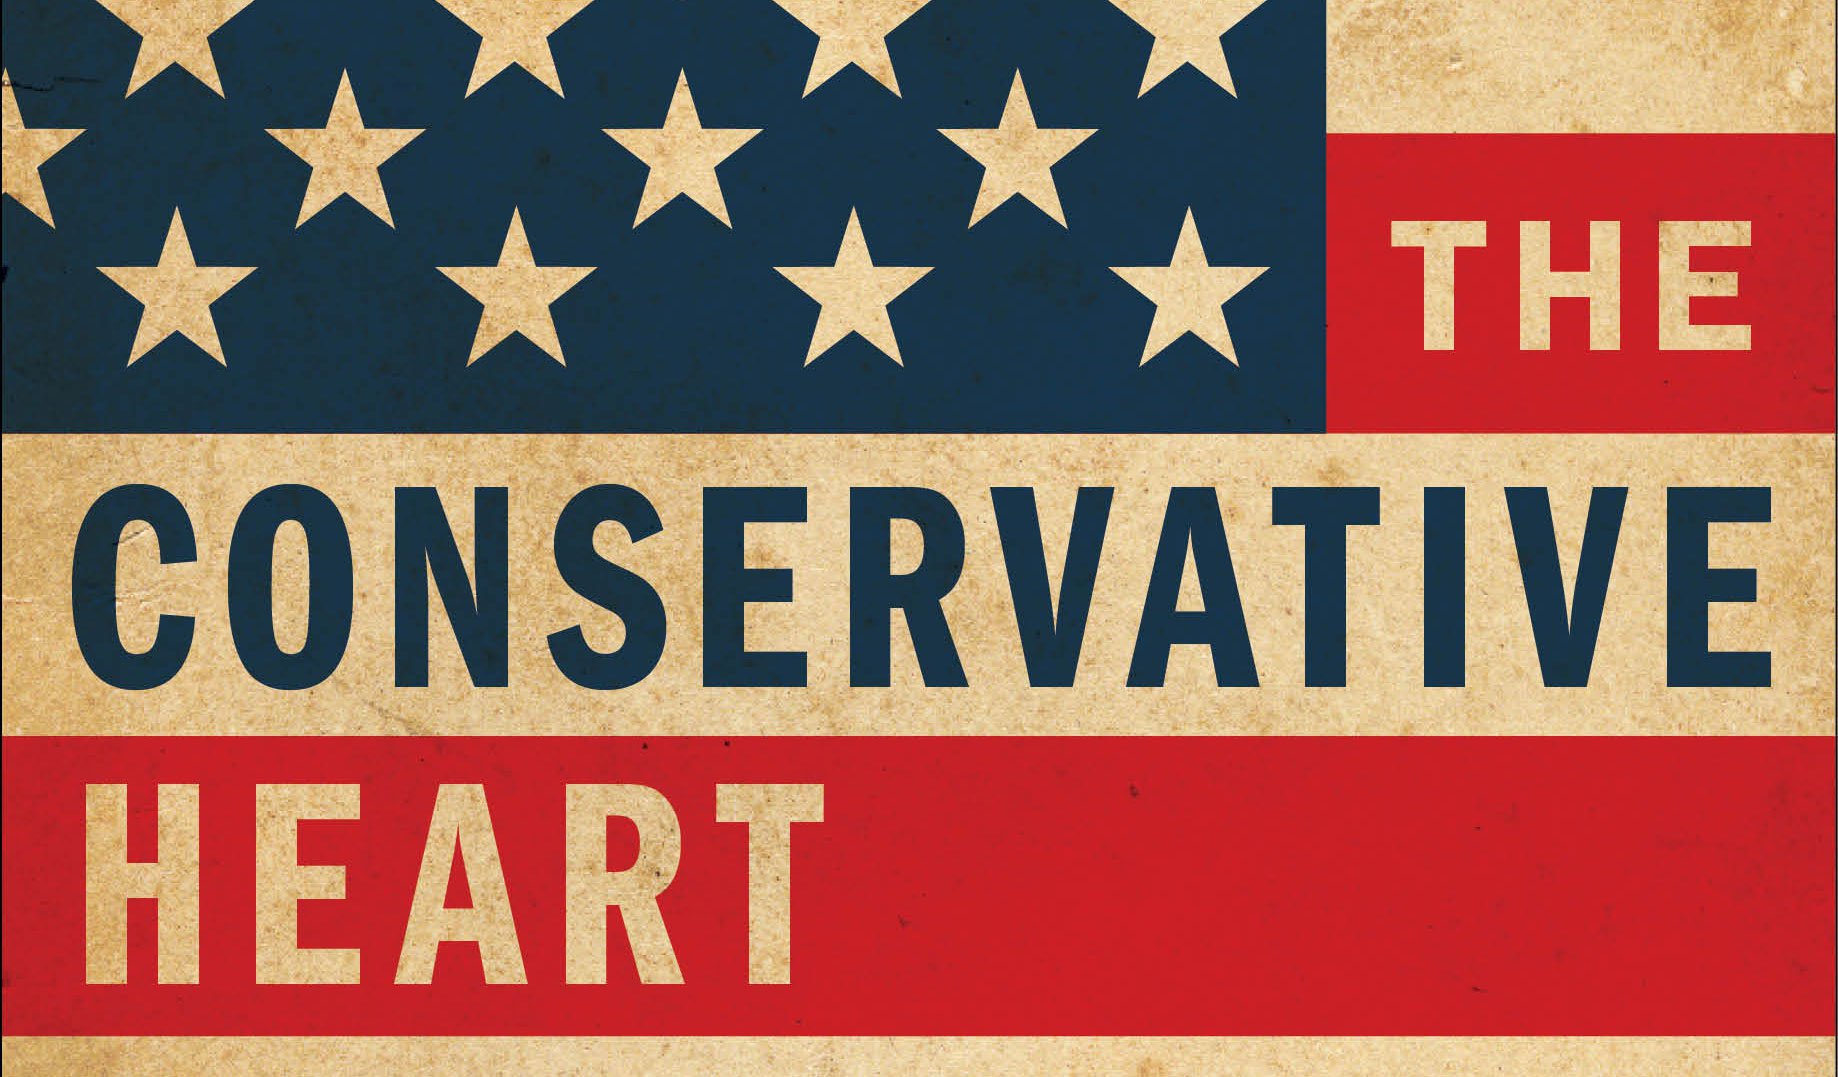 You Gotta Have Heart: A Guide for Conservatives | C2C Journal